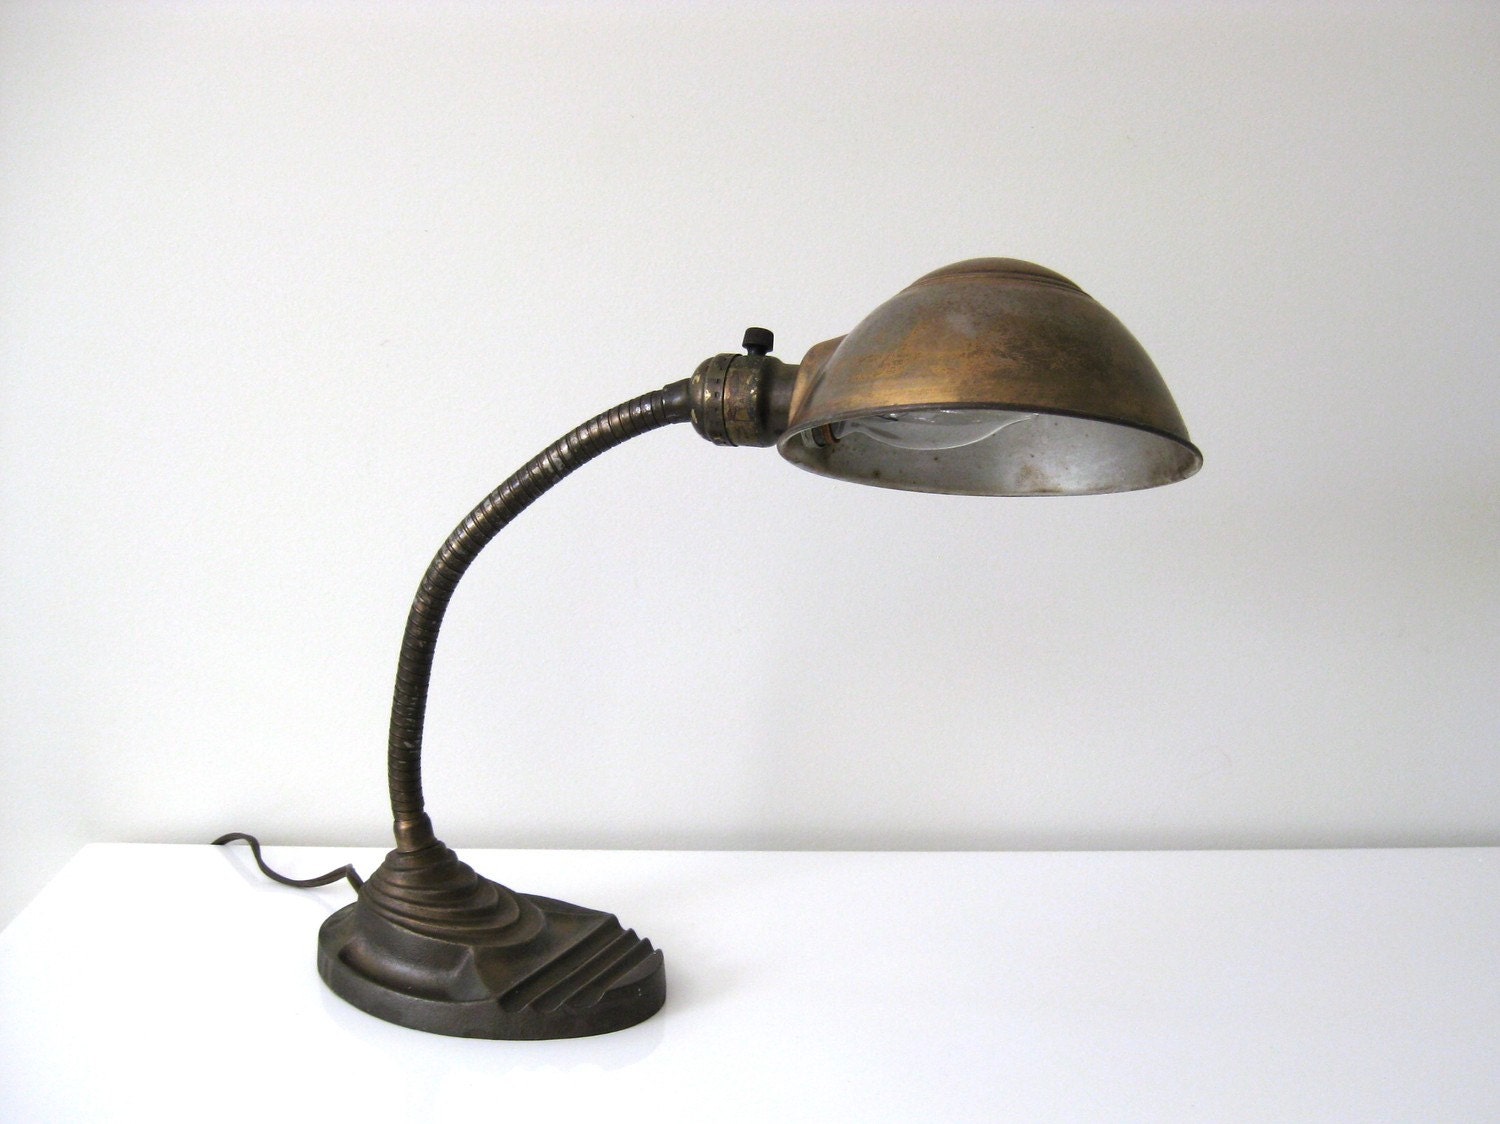 Antique Desk Lamps on Antique Industrial Desk Lamp By Pineandmain On Etsy